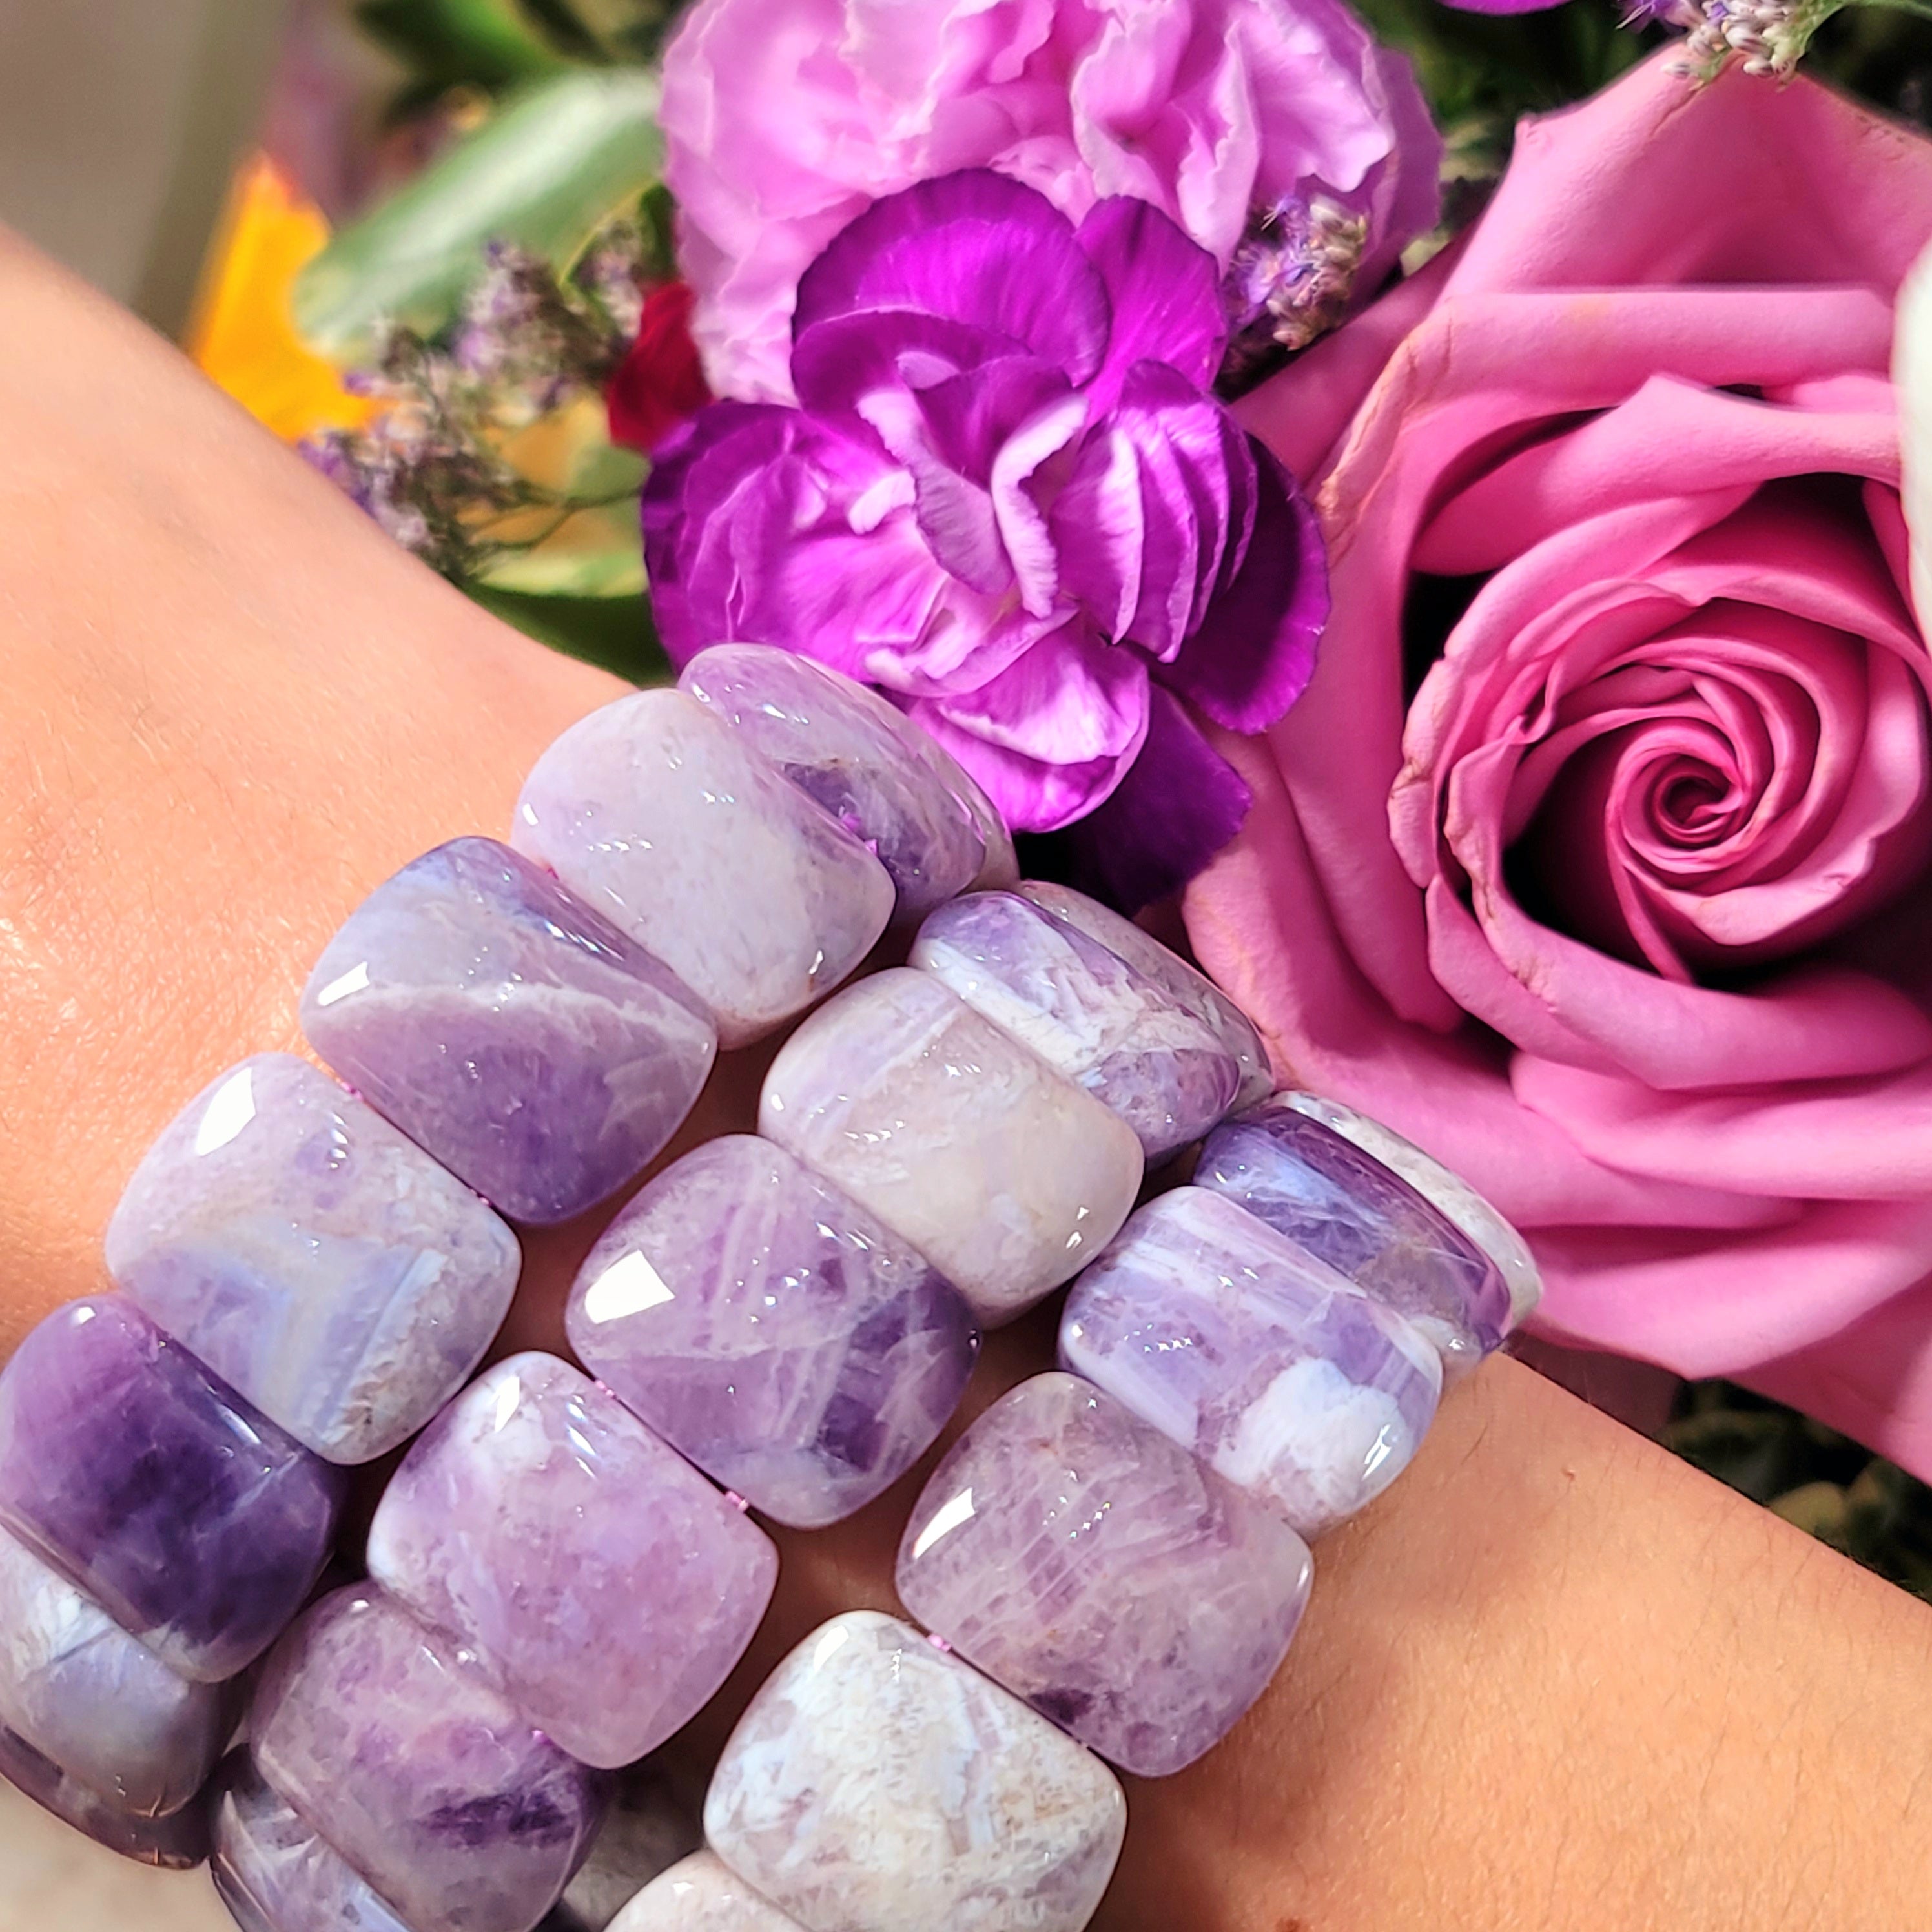 Chevron Amethyst Stretchy Bangle Bracelet for Clarity, Intuition and Protection